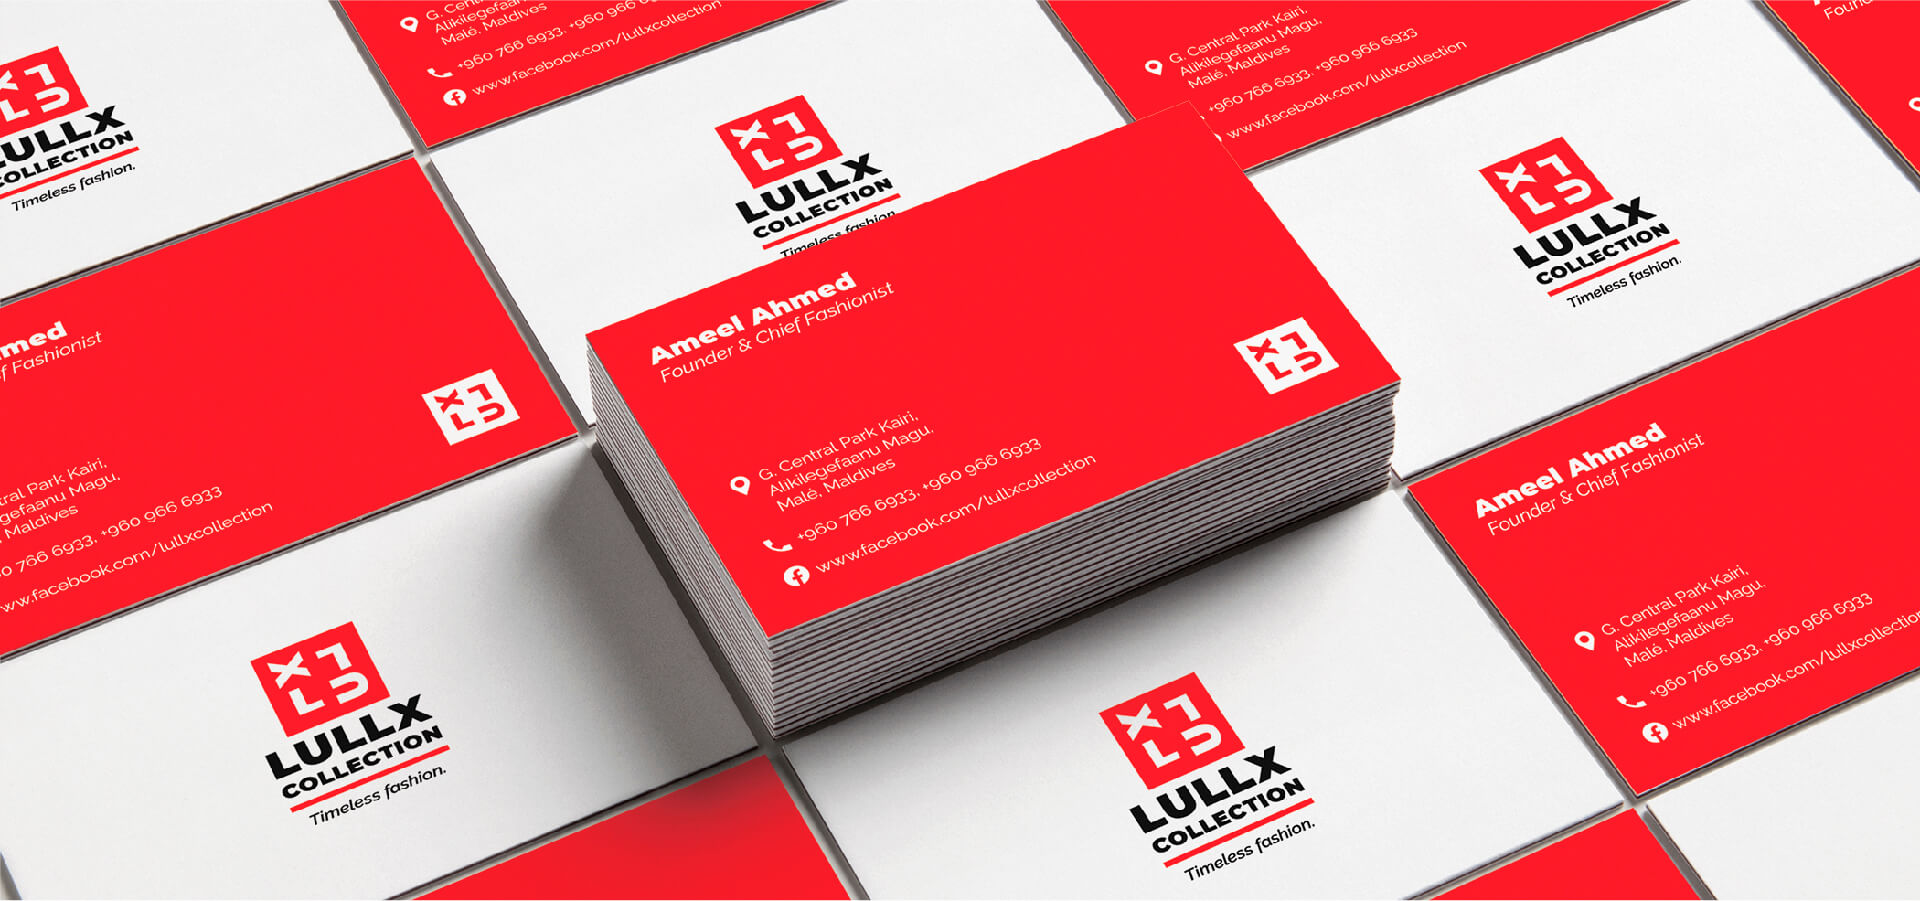 Business card mockup for Lullx Collection